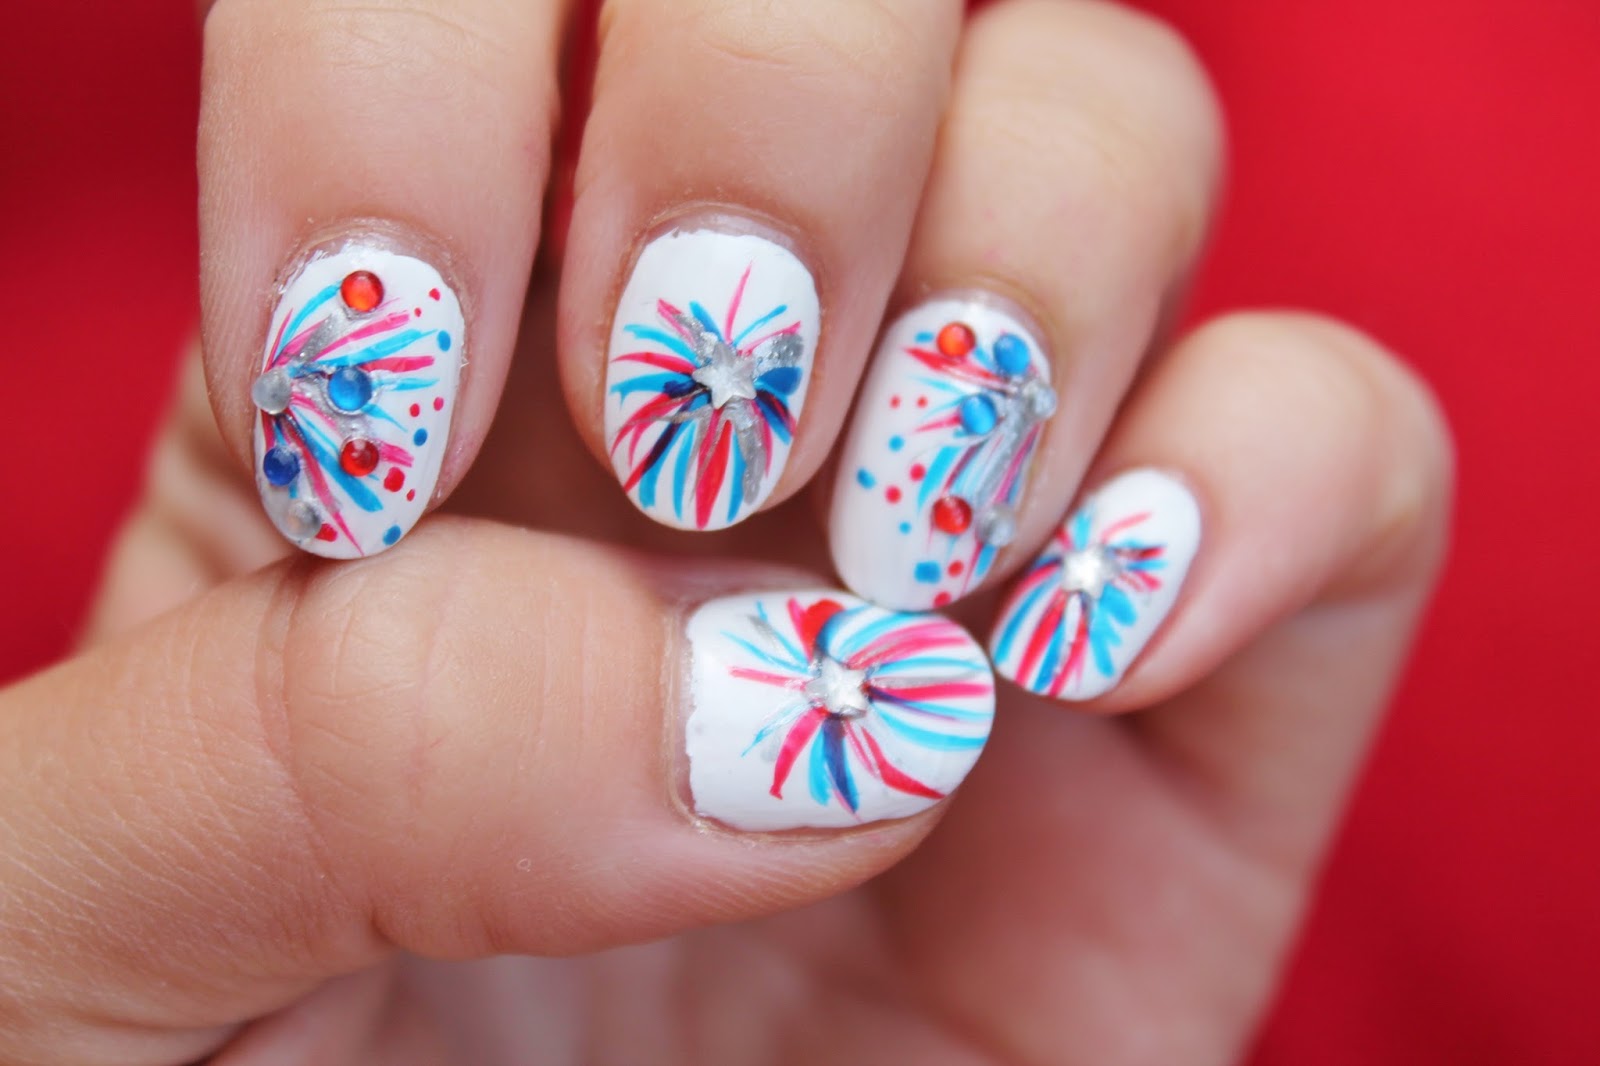 2. American Flag Nails - wide 5